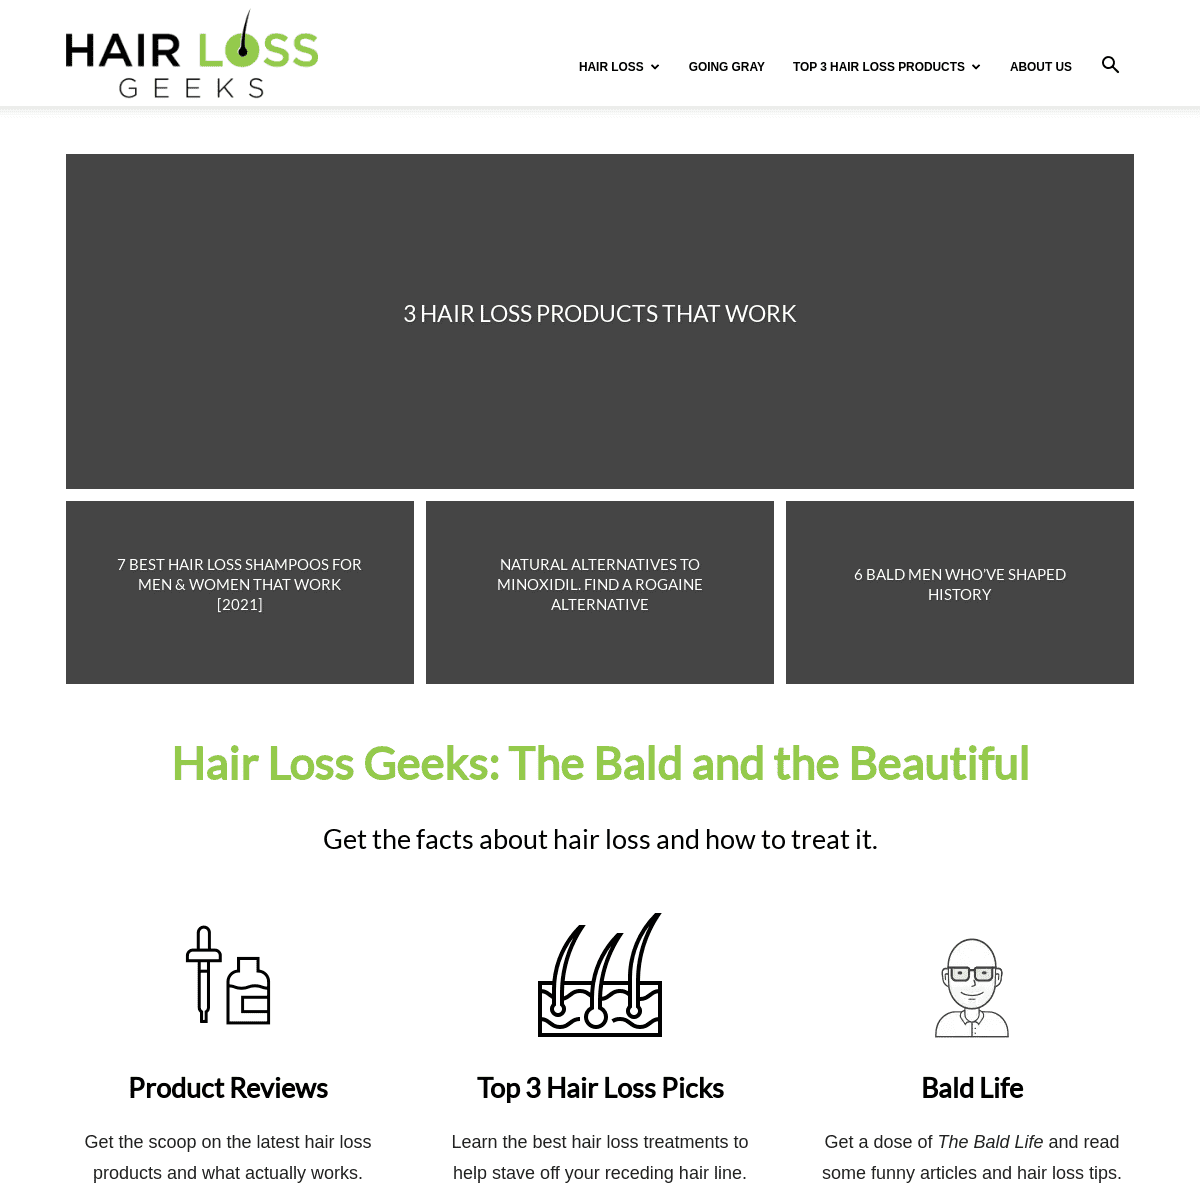 A complete backup of https://hairlossgeeks.com